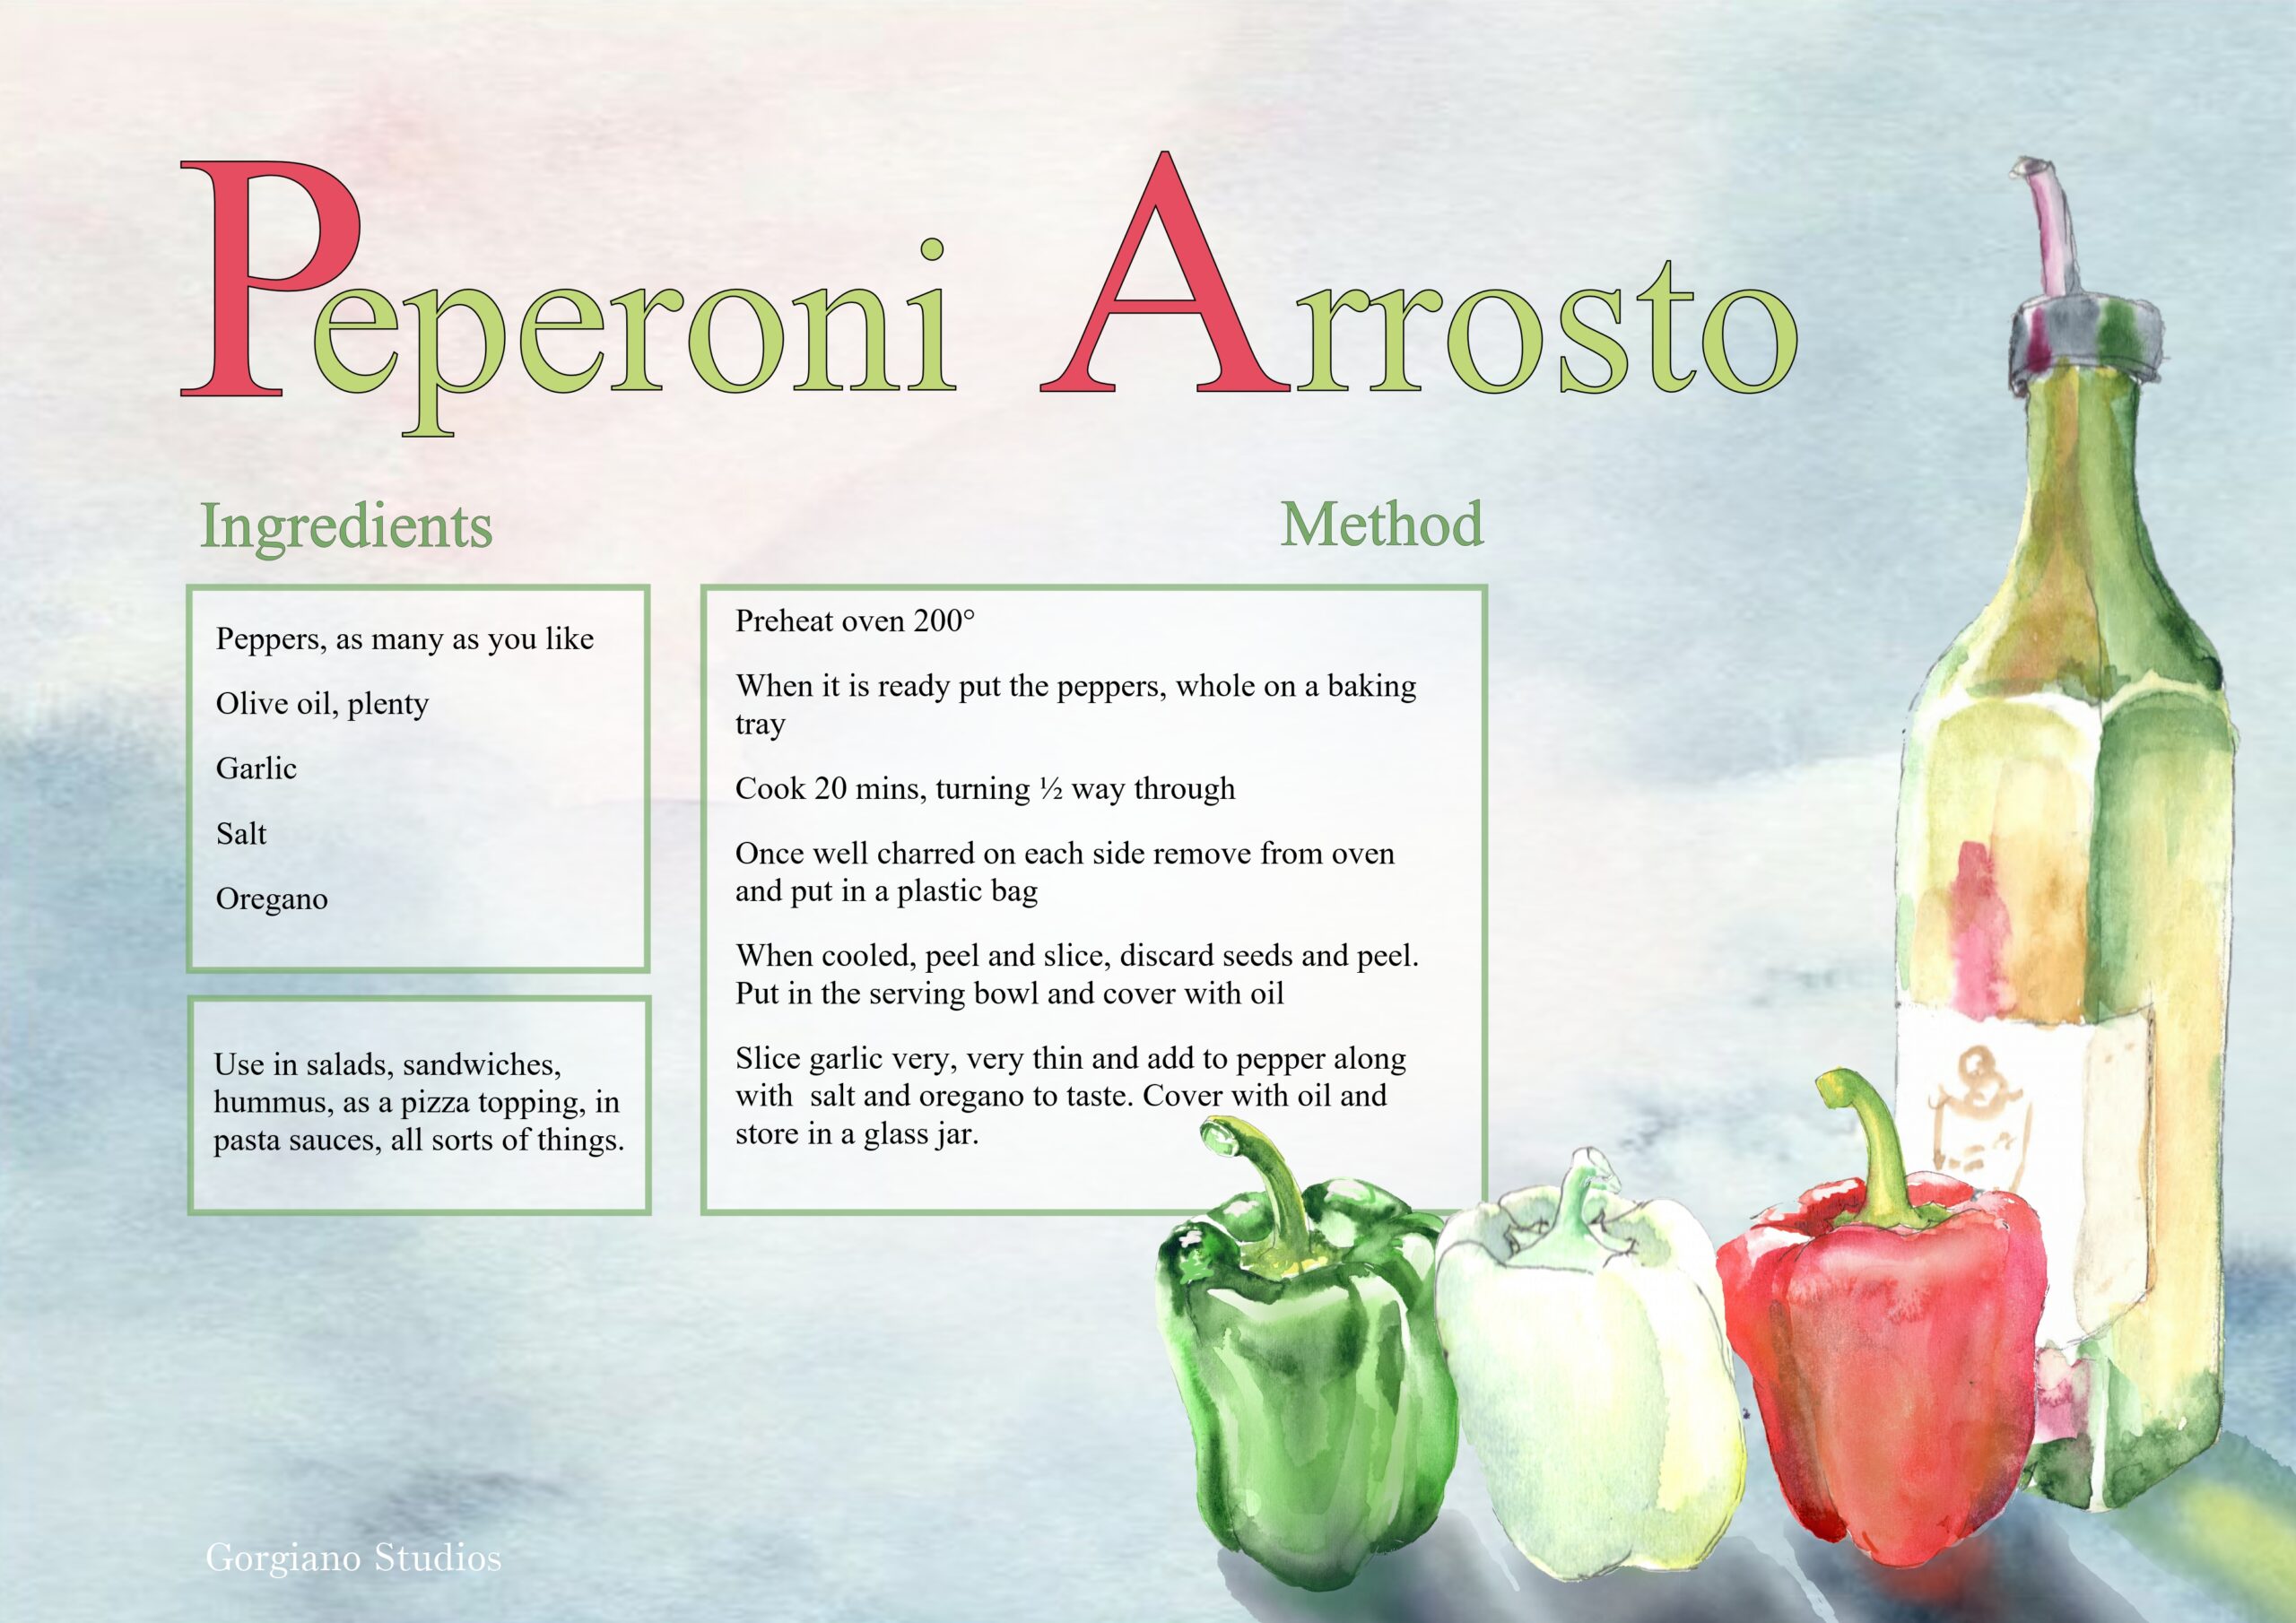 Recipe roast peperoni for Gorgiano Studios and painting holiday italy illustrated by Caroline Crawford